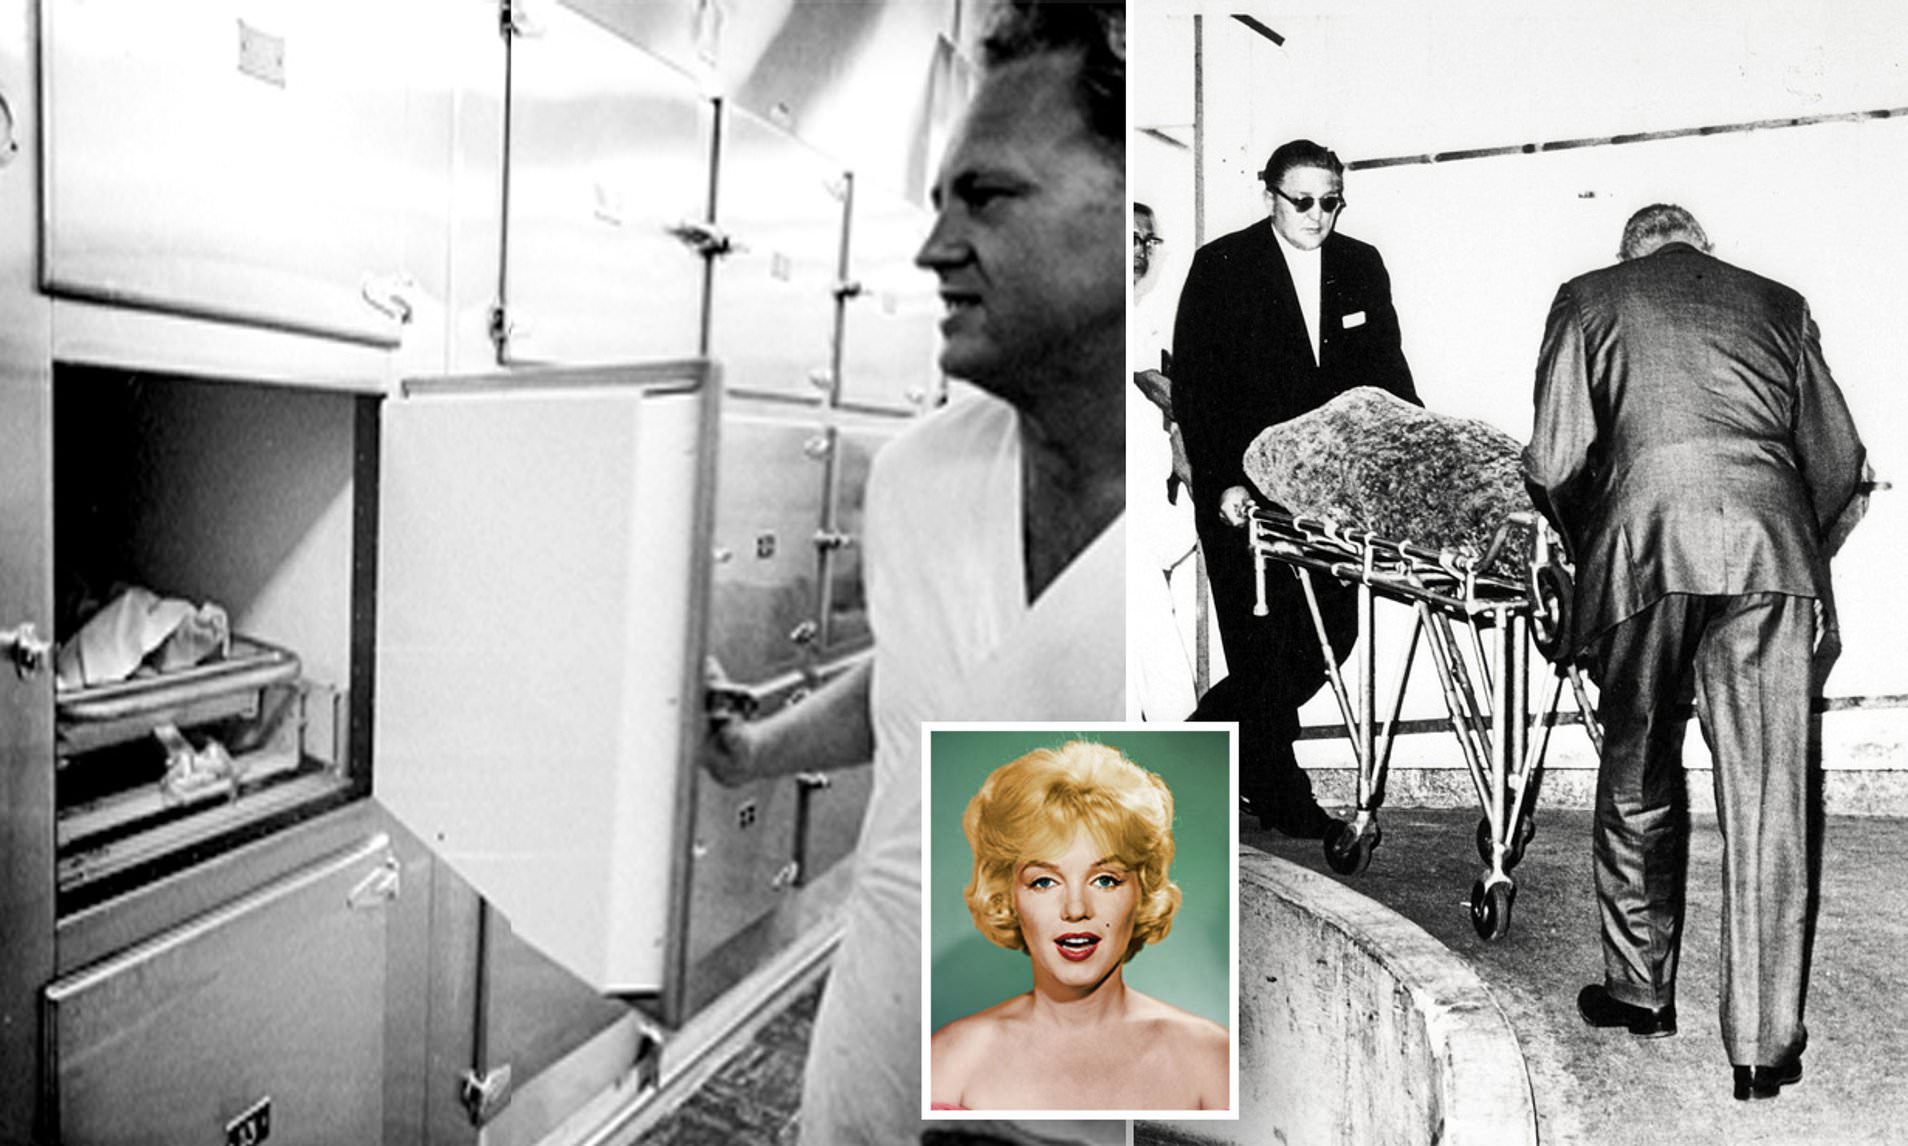 Pictures of Marilyn Monroe's naked corpse were taken just hours after her death